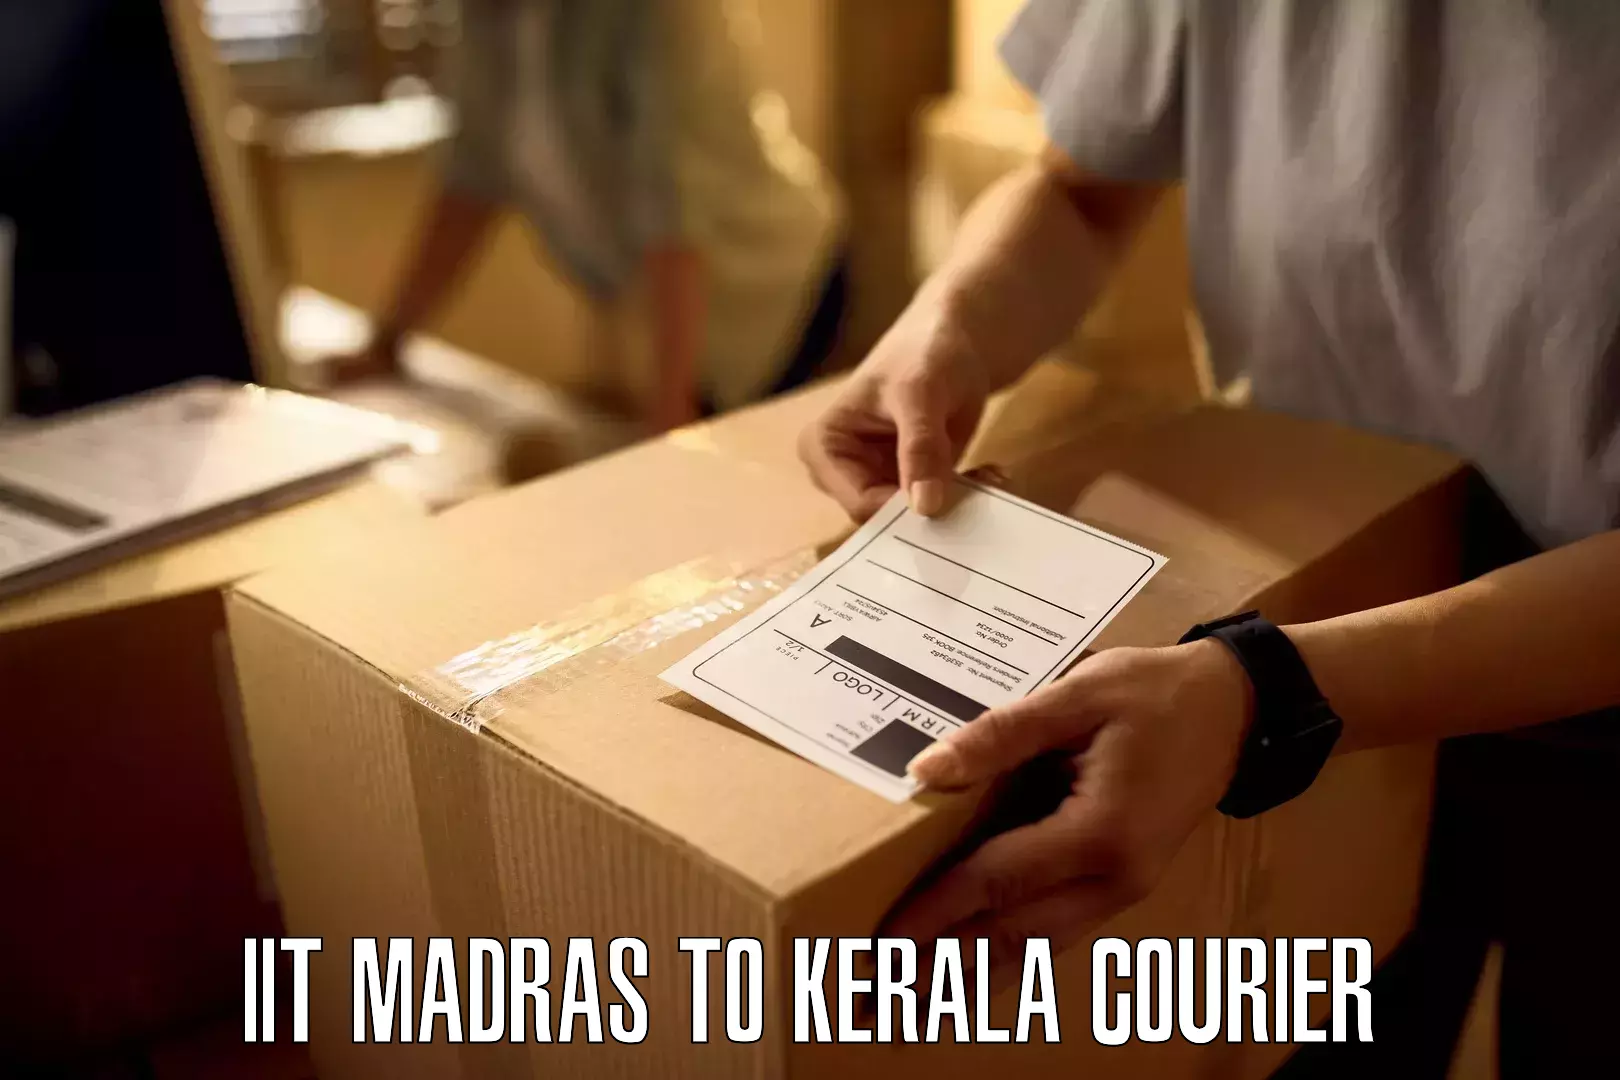 Cash on delivery service IIT Madras to Ernakulam